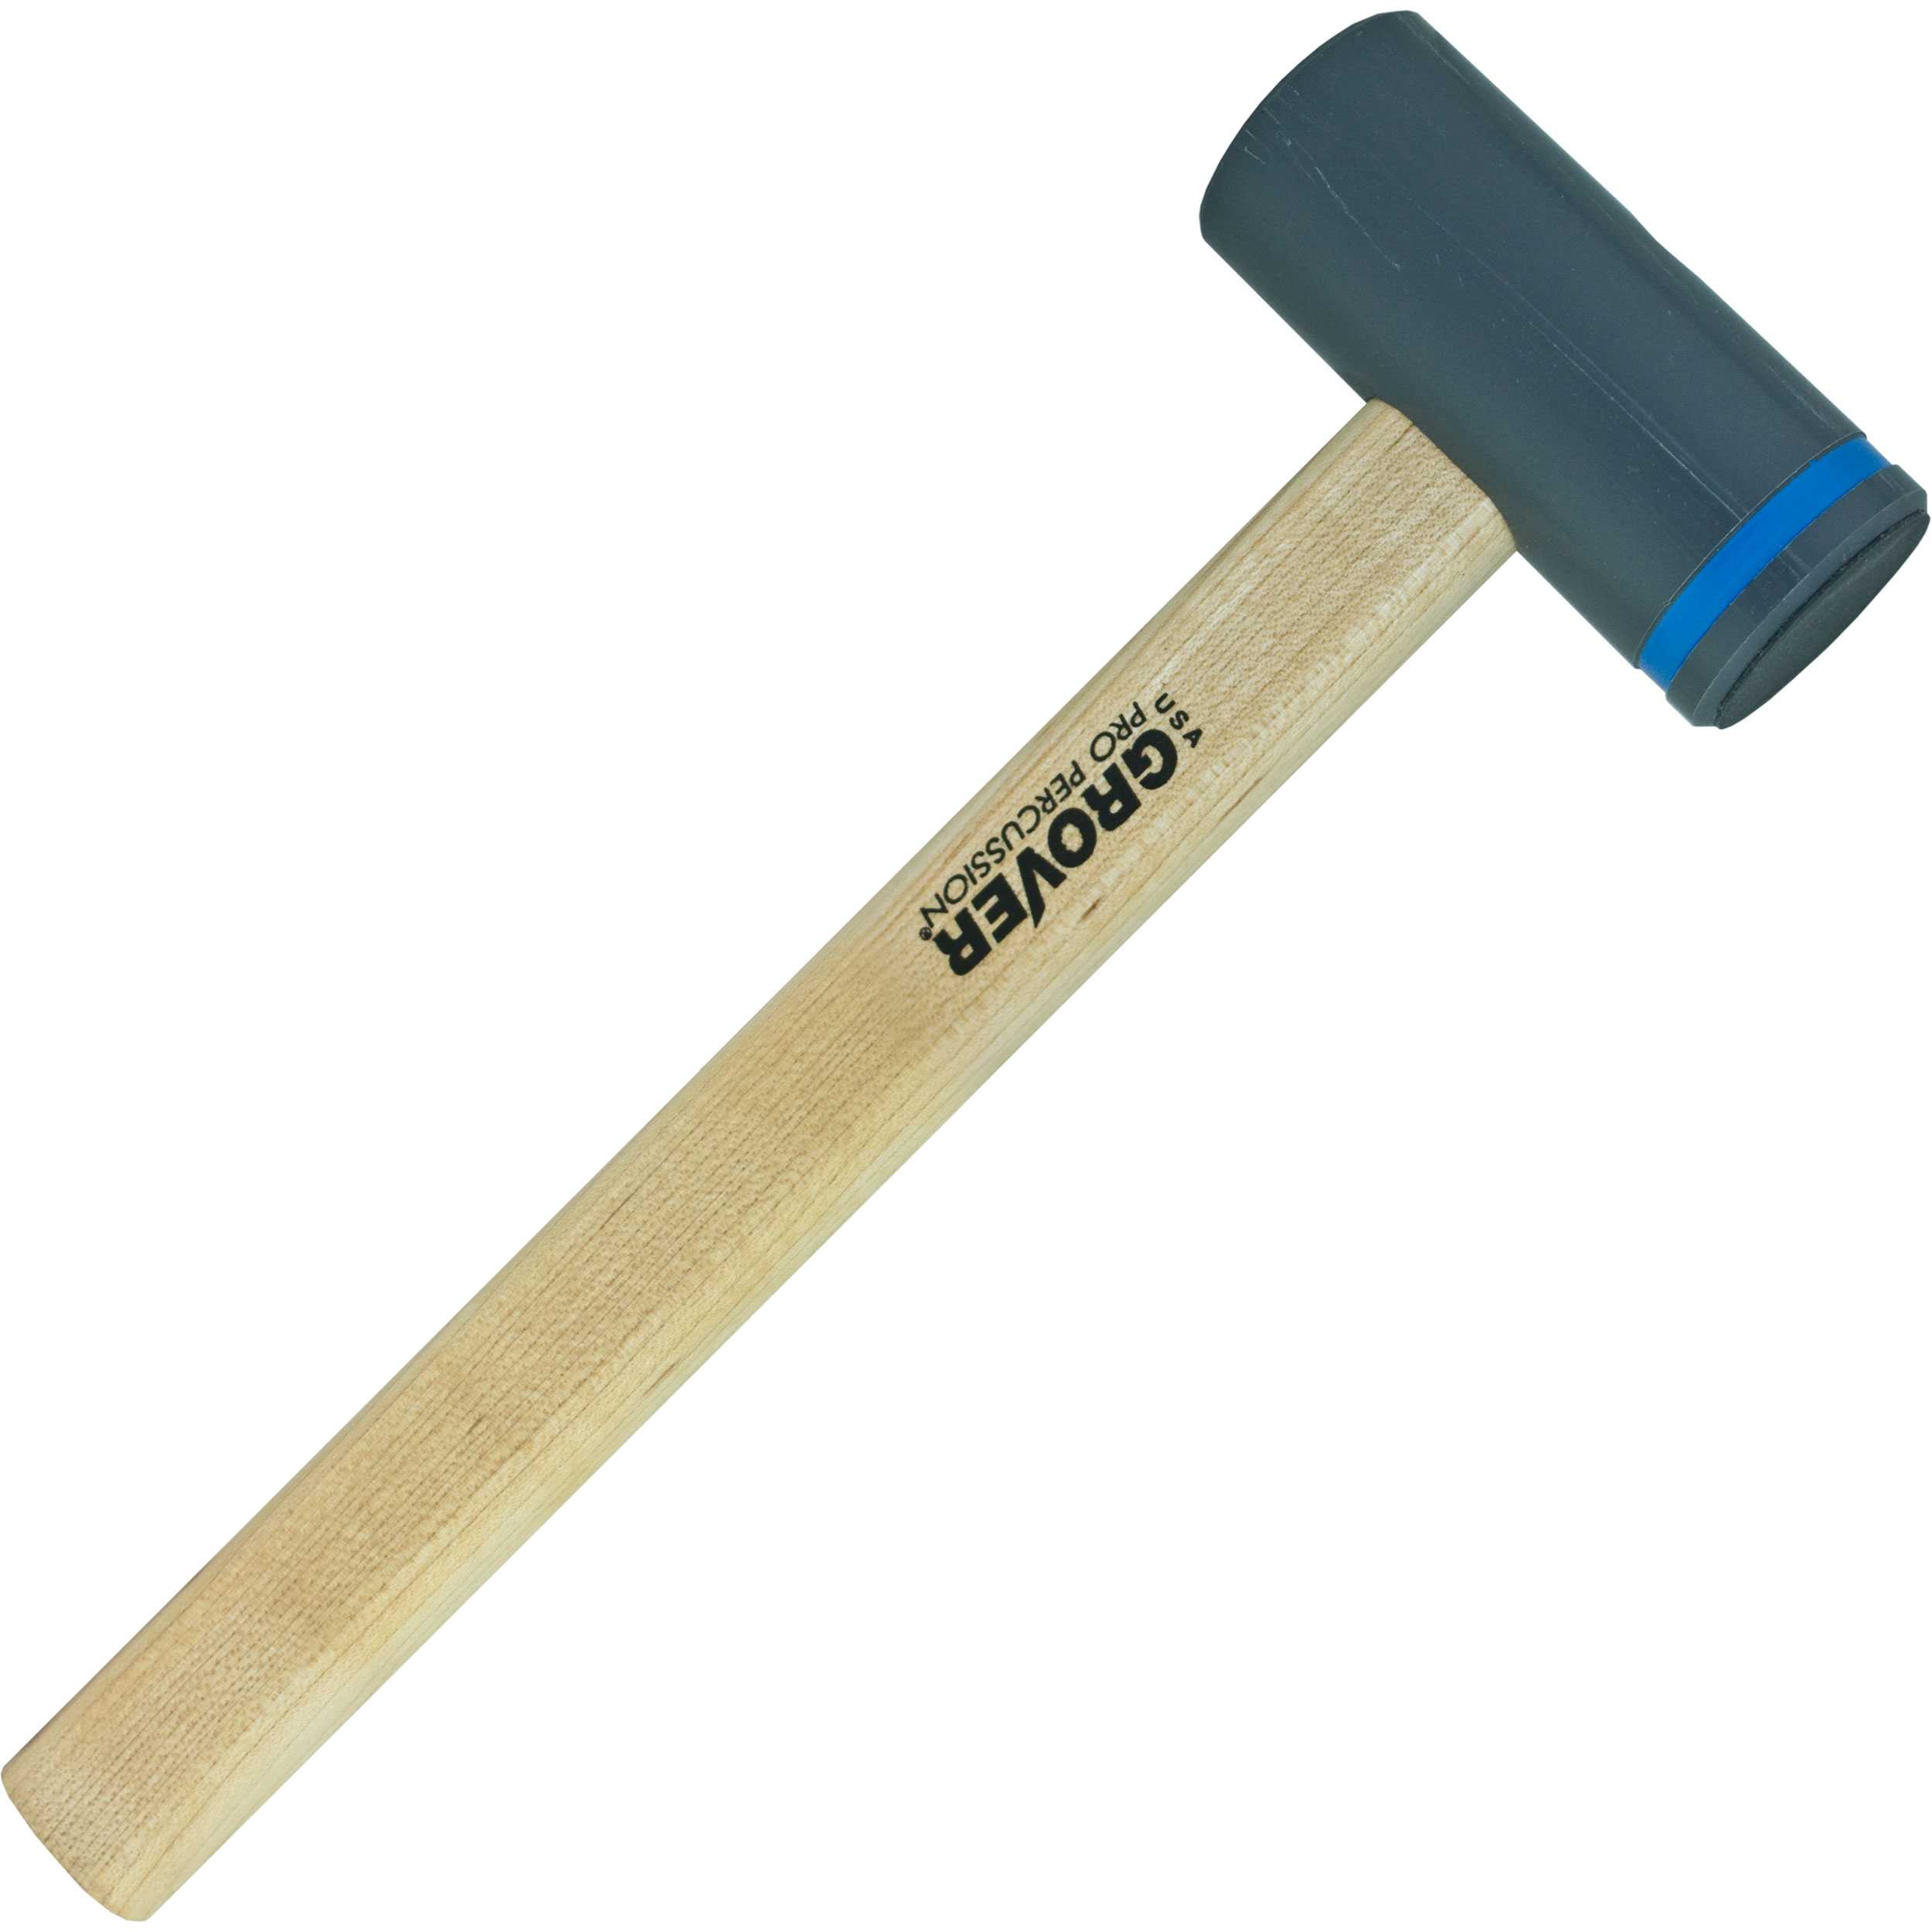 Grover Pro Large Head Chime Mallet